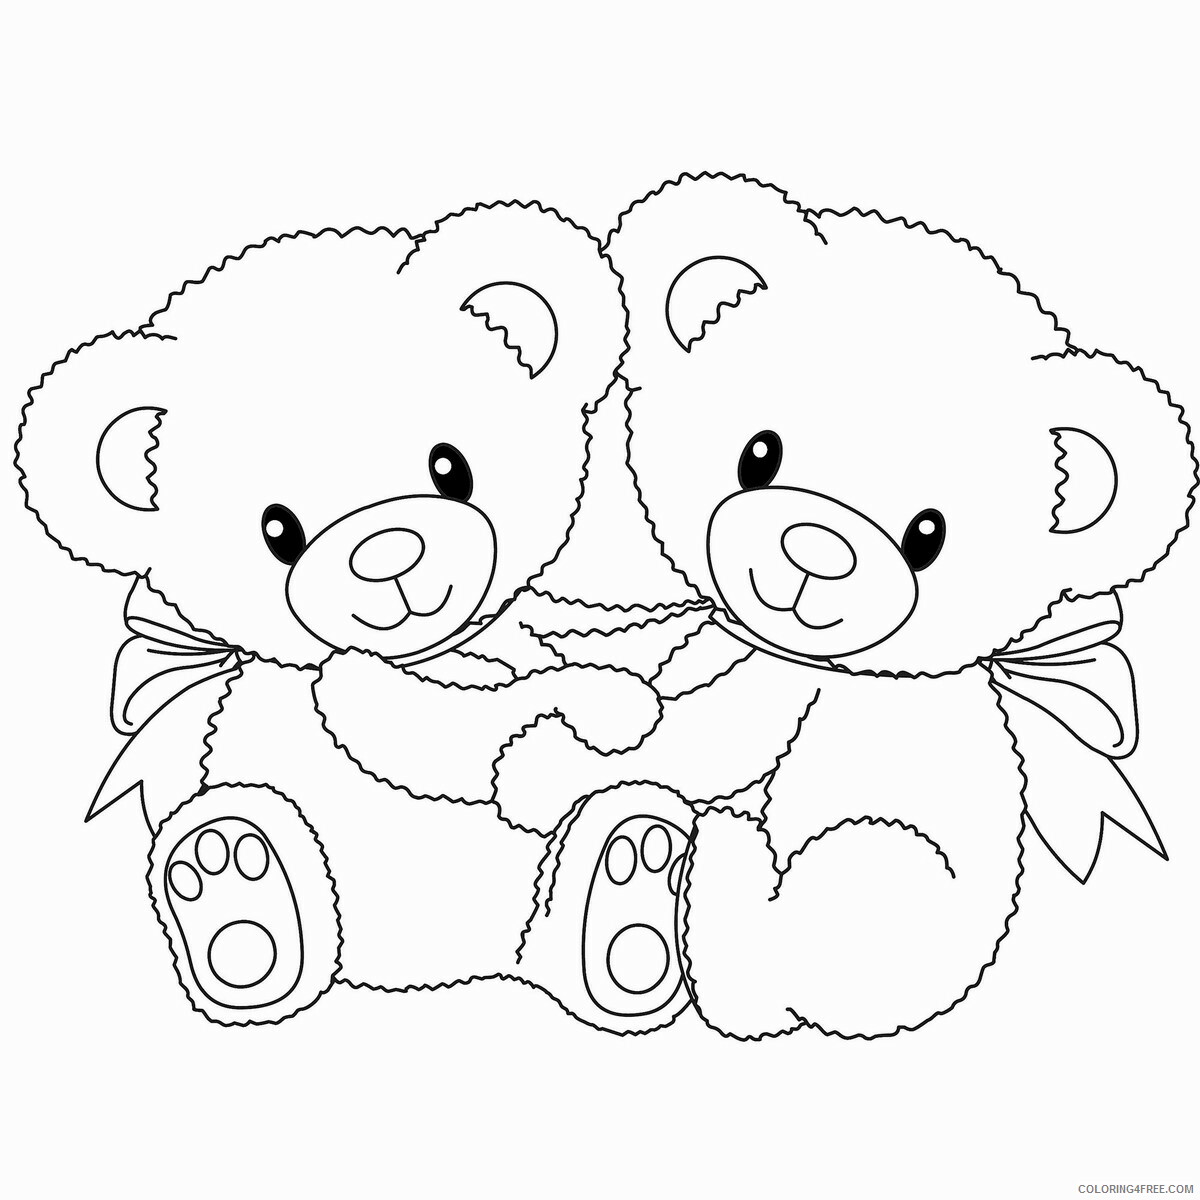 Bear Coloring Pages Animal Printable Sheets bear_cl_18 2021 0259 Coloring4free